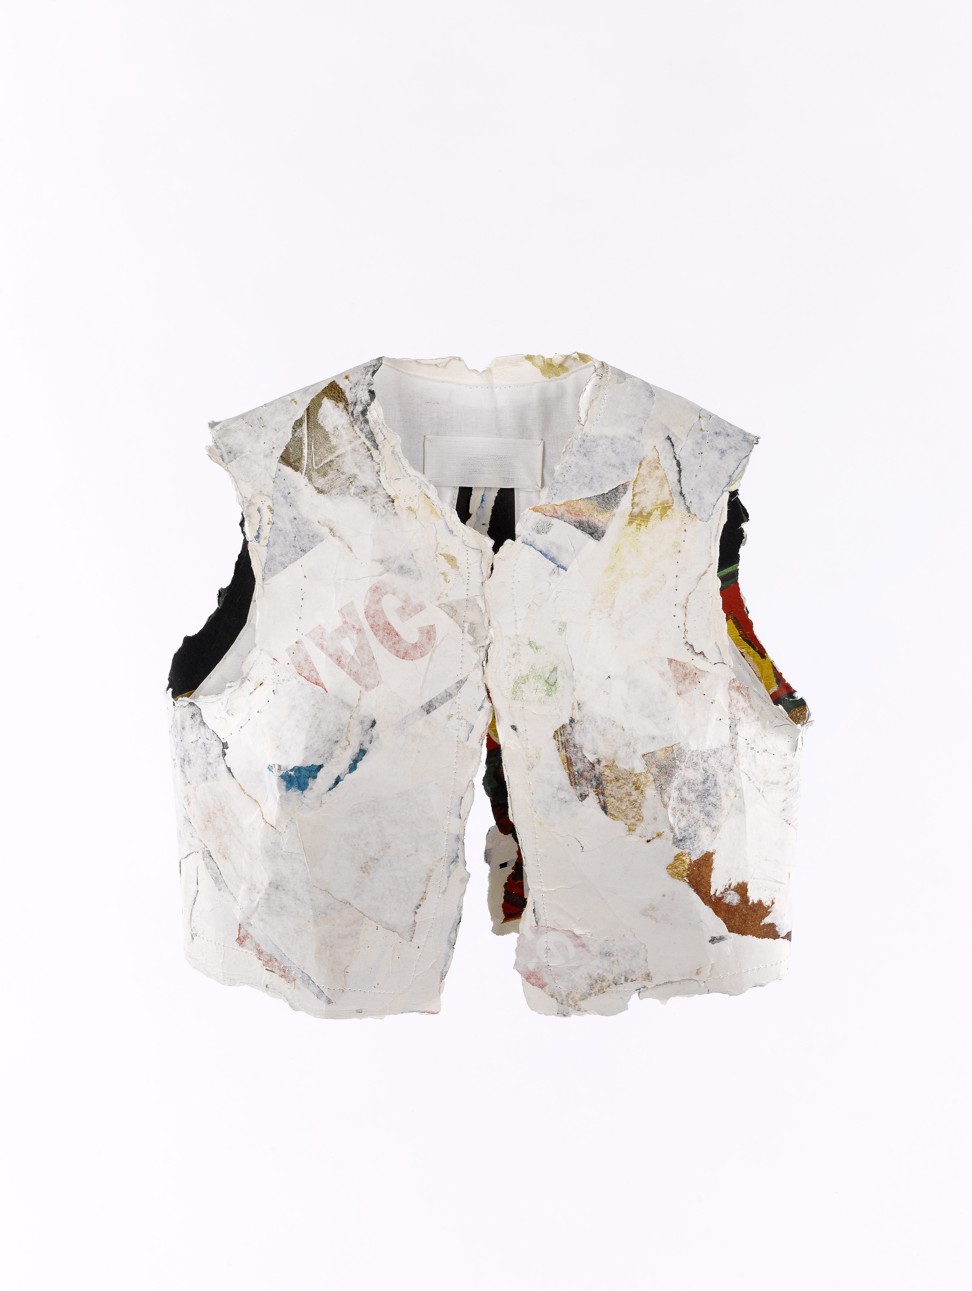 Vest made with newspaper ads by Martin Margiela.